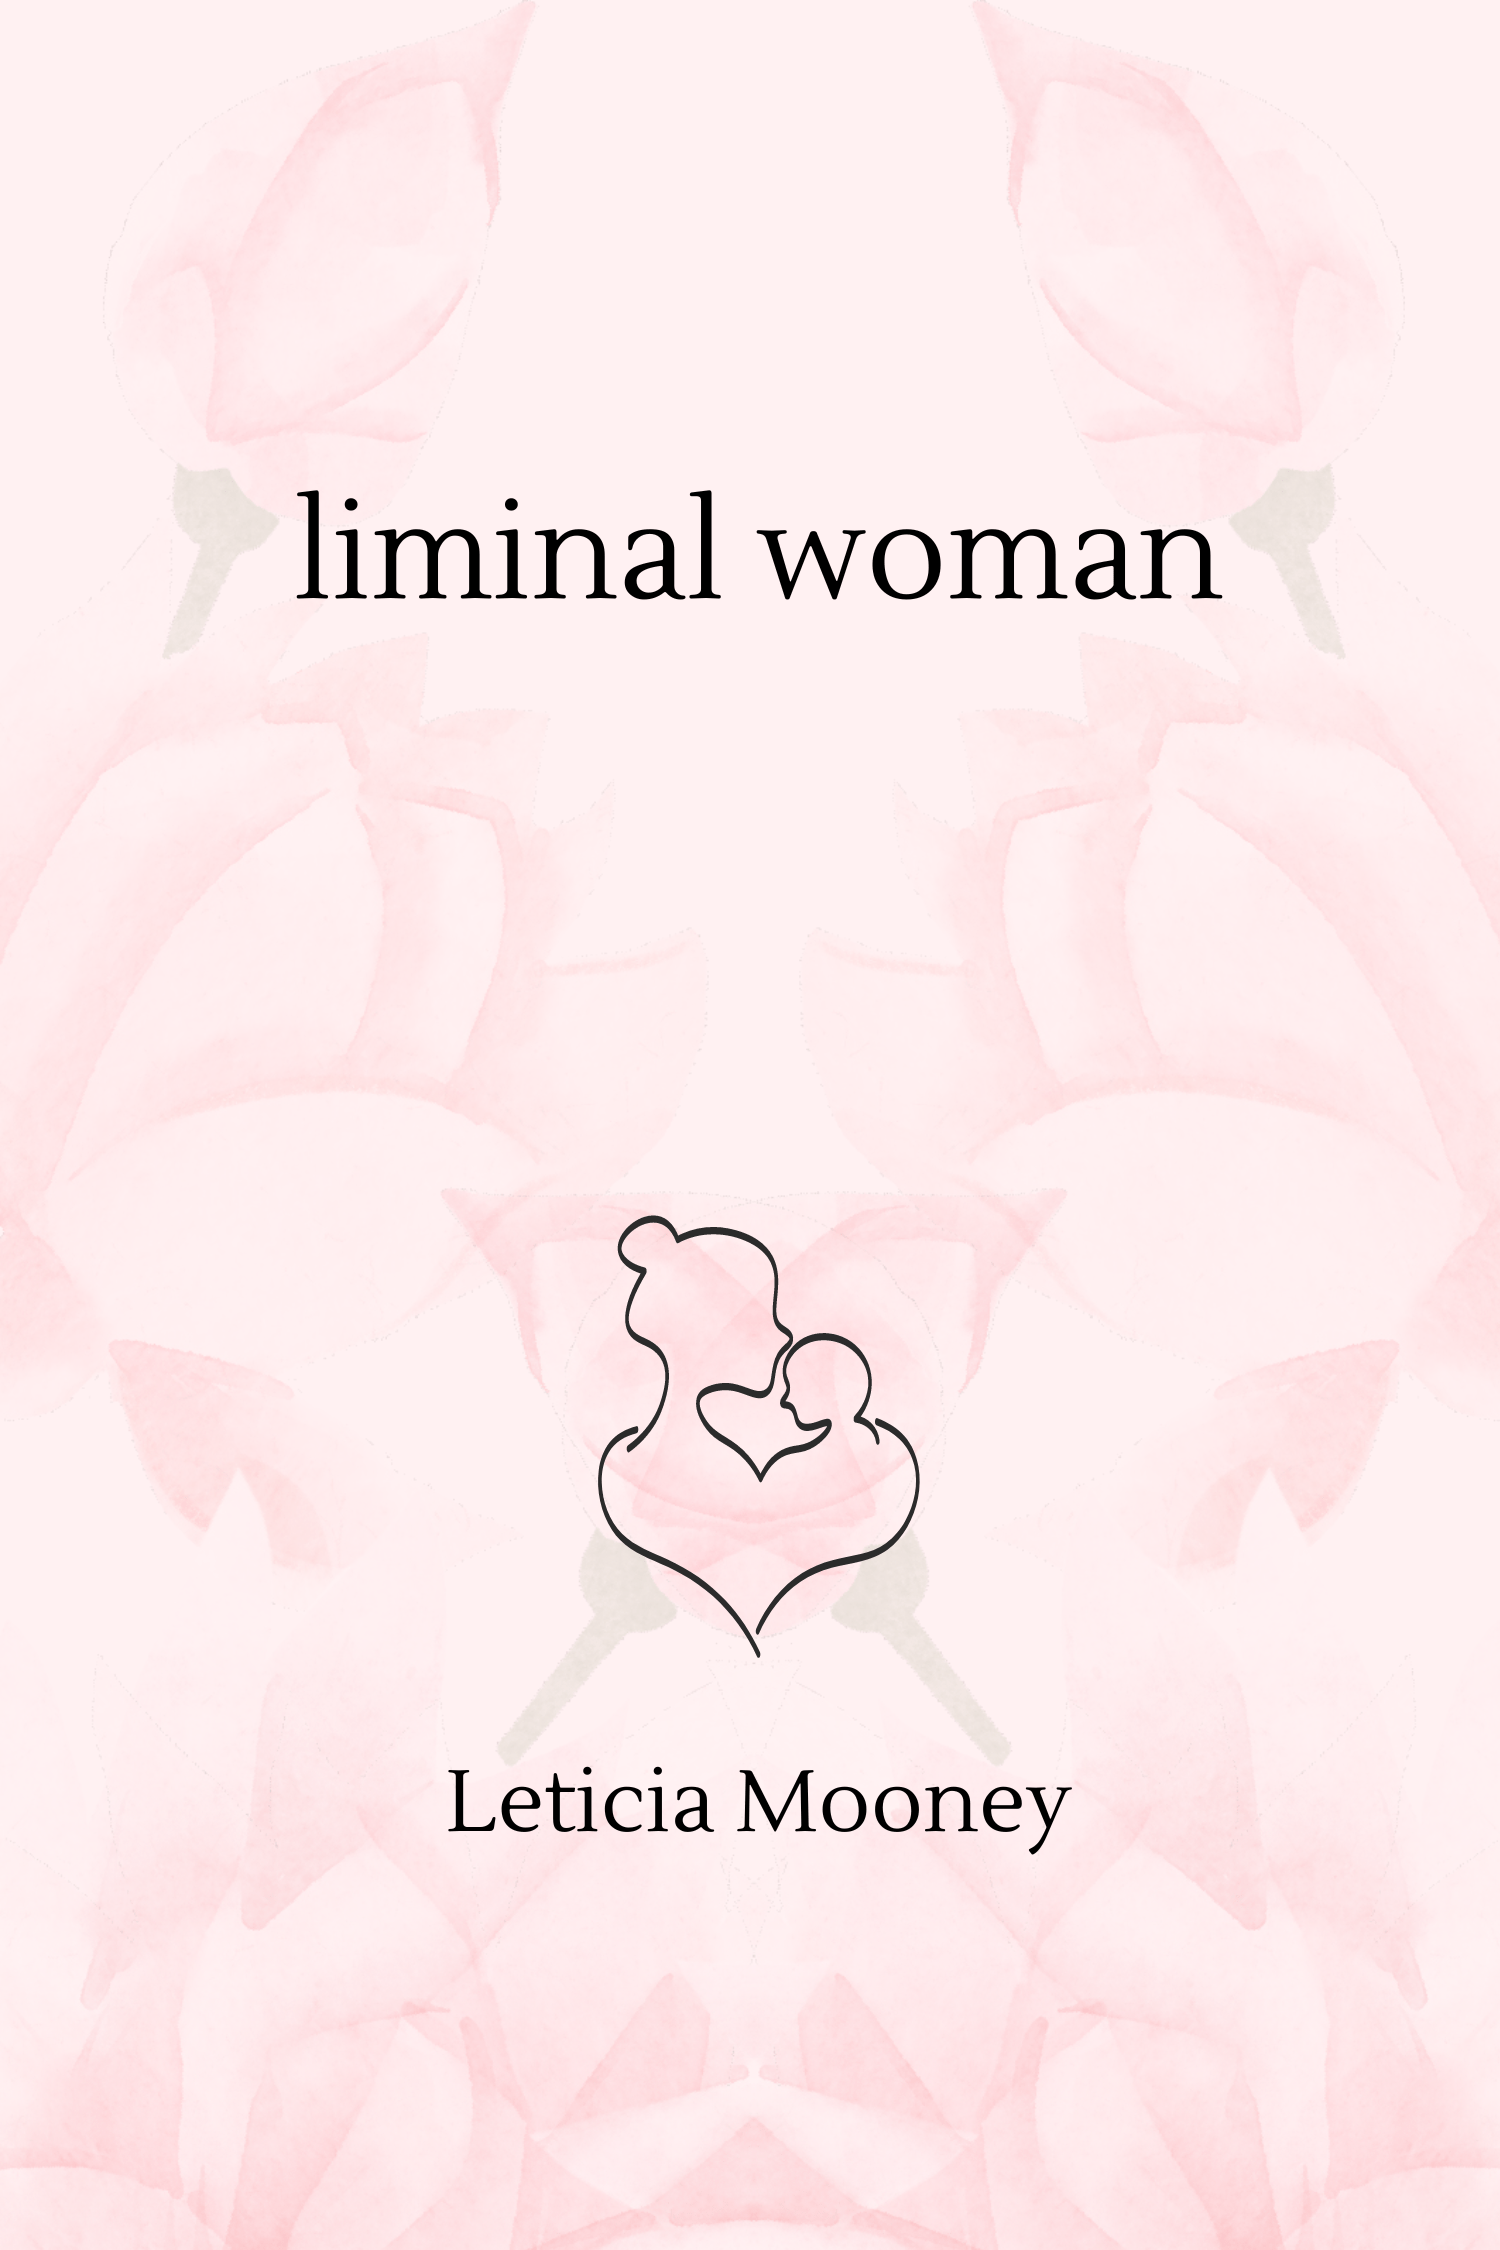 Liminal Woman Launch Week is here!